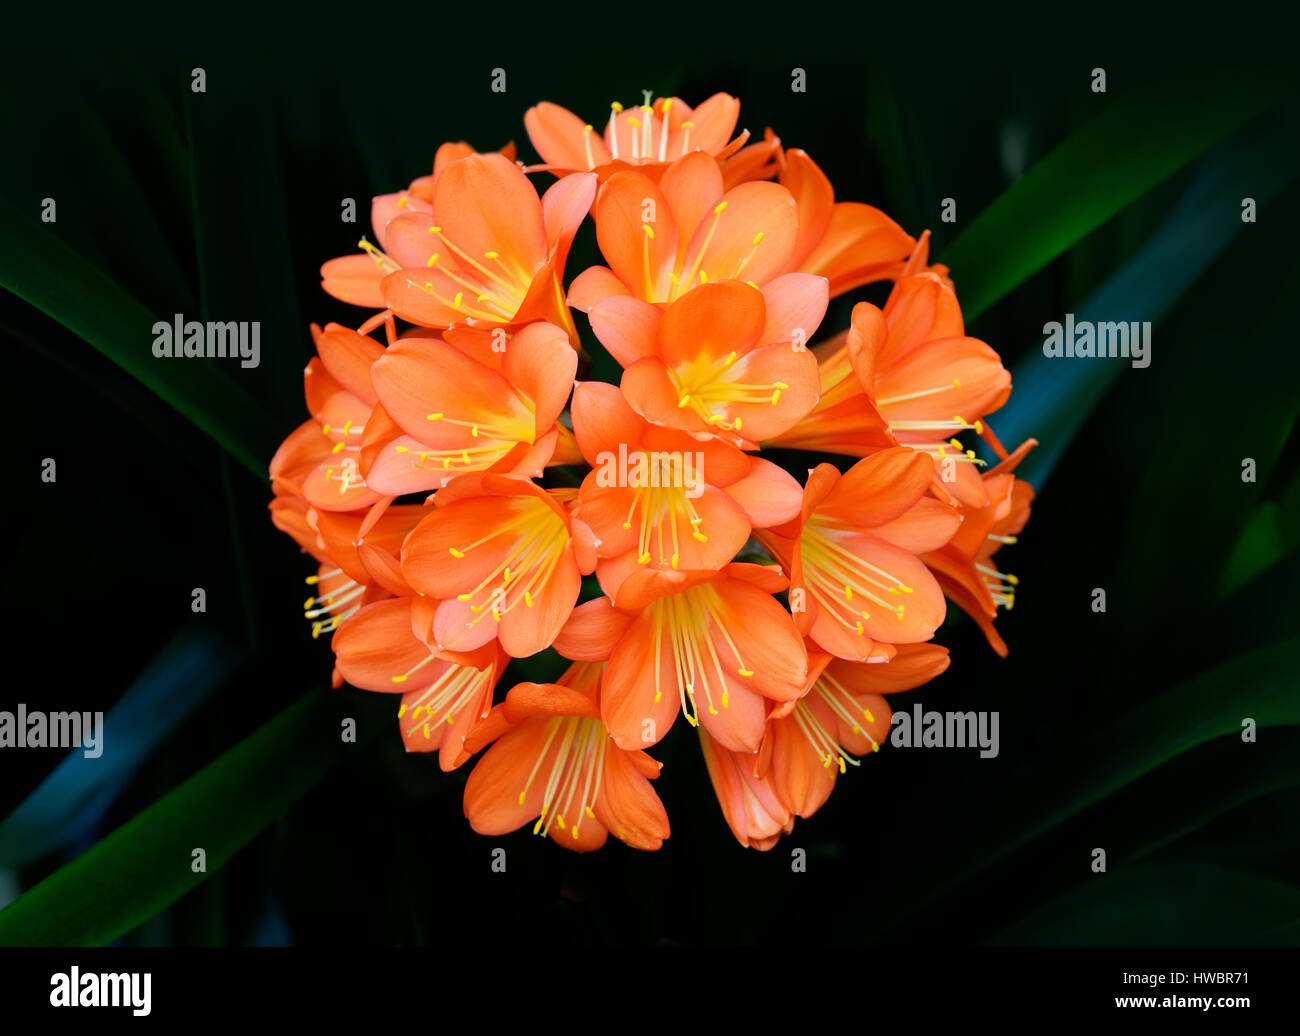 Plants and flowers: orange Clivia Miniata, bush lily close-up shot, shallow DOF, natural abstract background Stock Photo